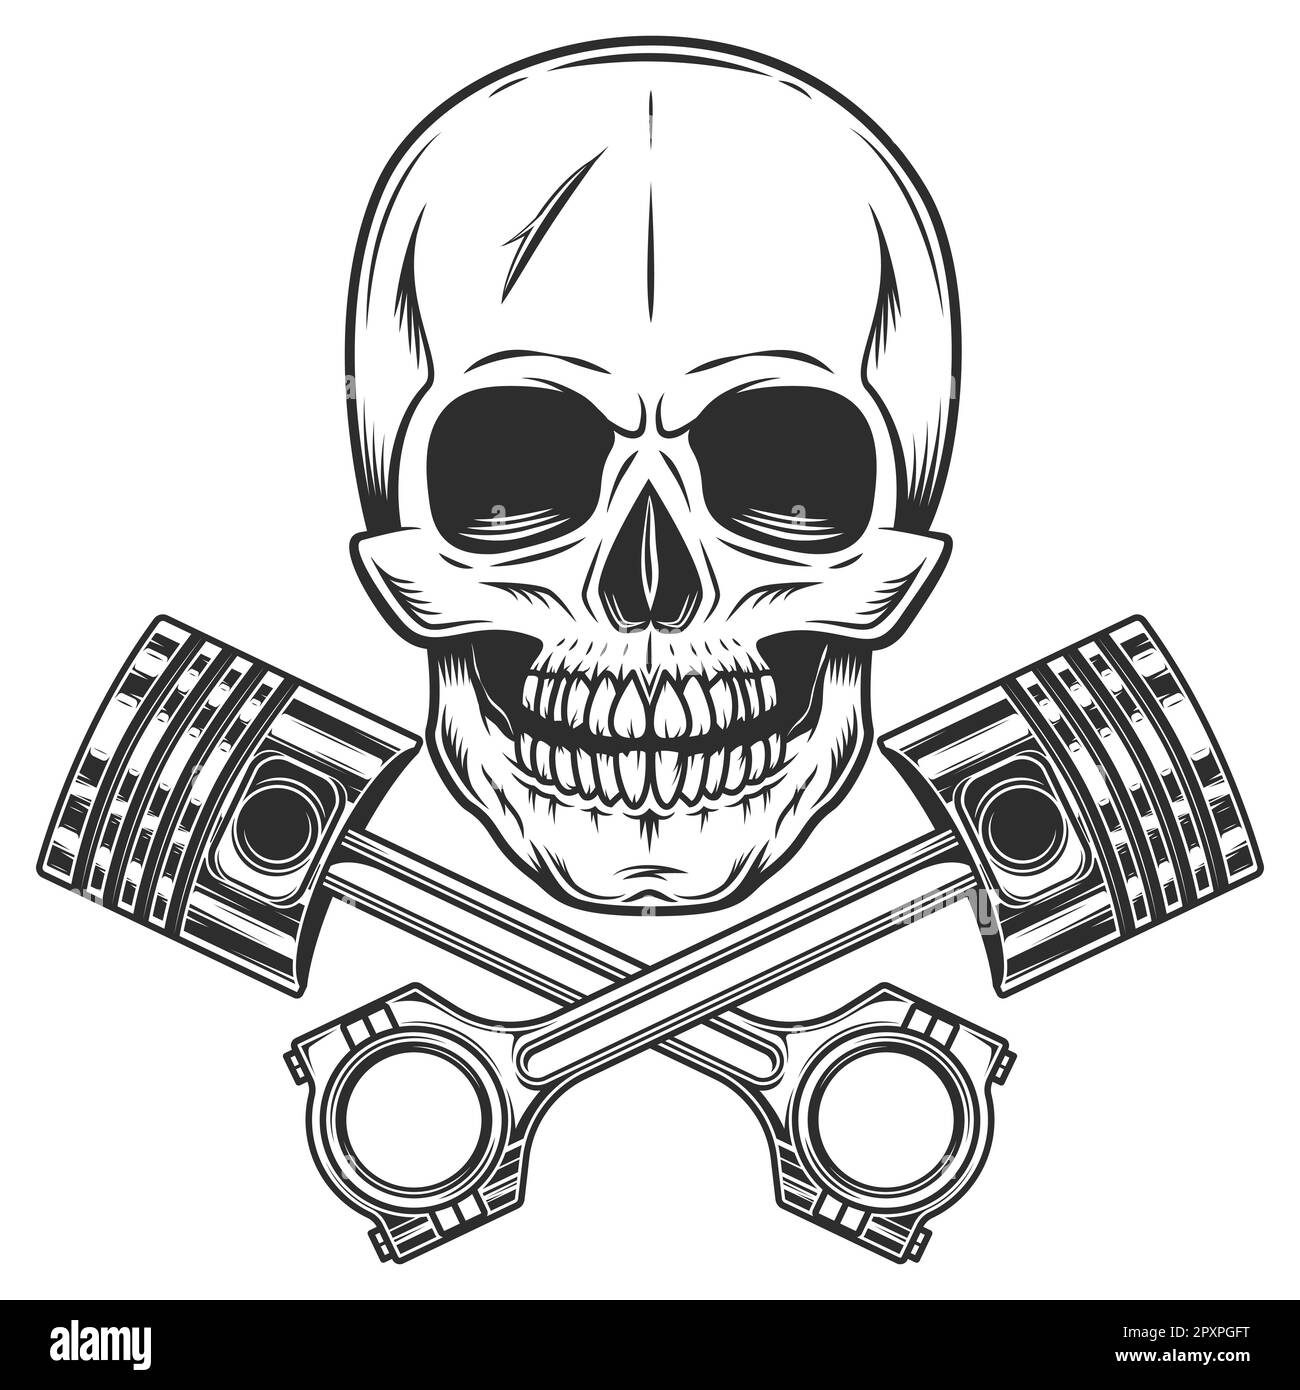 Motorcyclist skull and crossed engine pistons service repair motorcycle ...